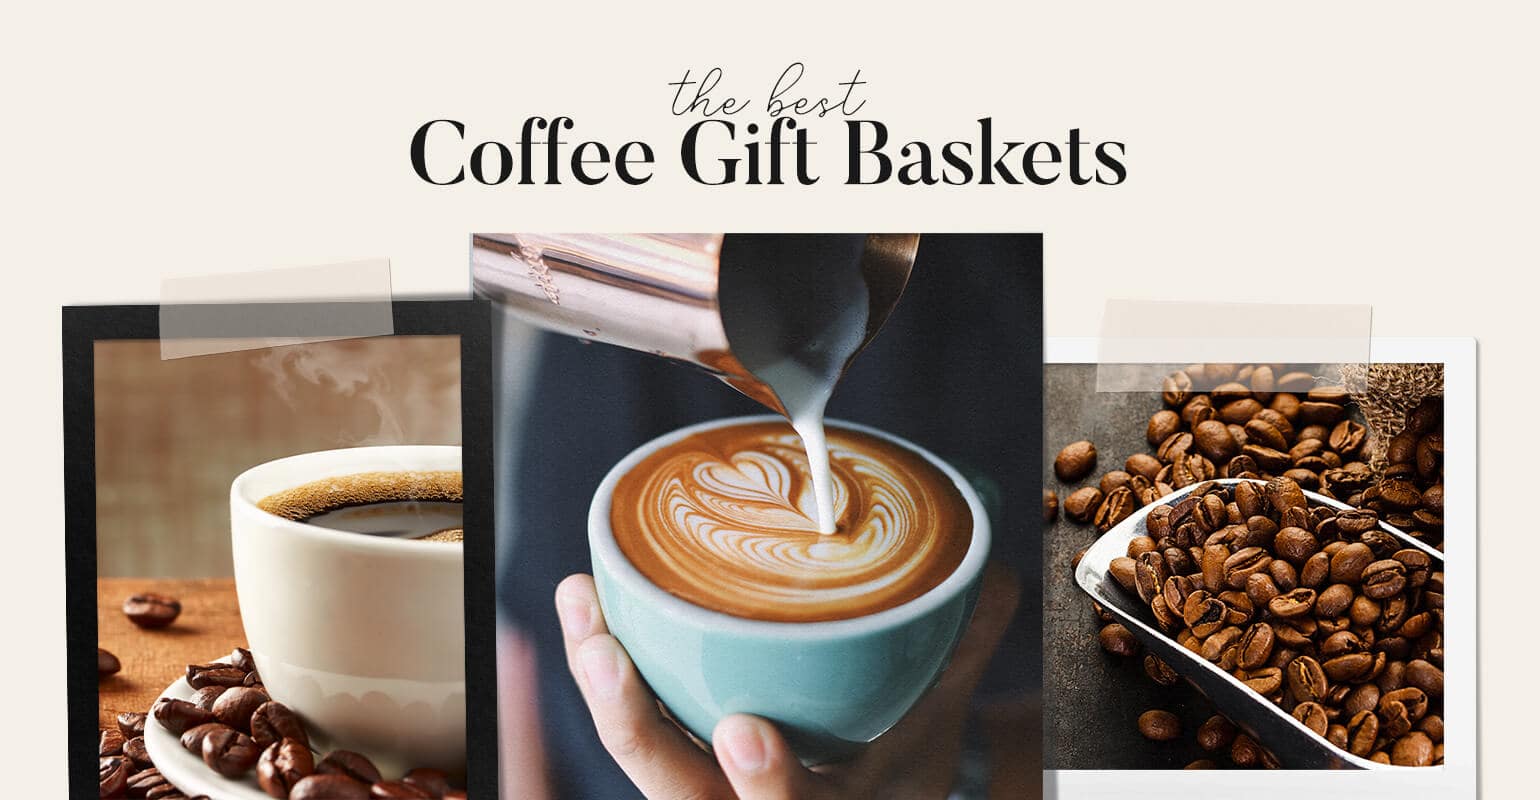 7 Brew-tiful Coffee Gift Baskets for Java Lovers